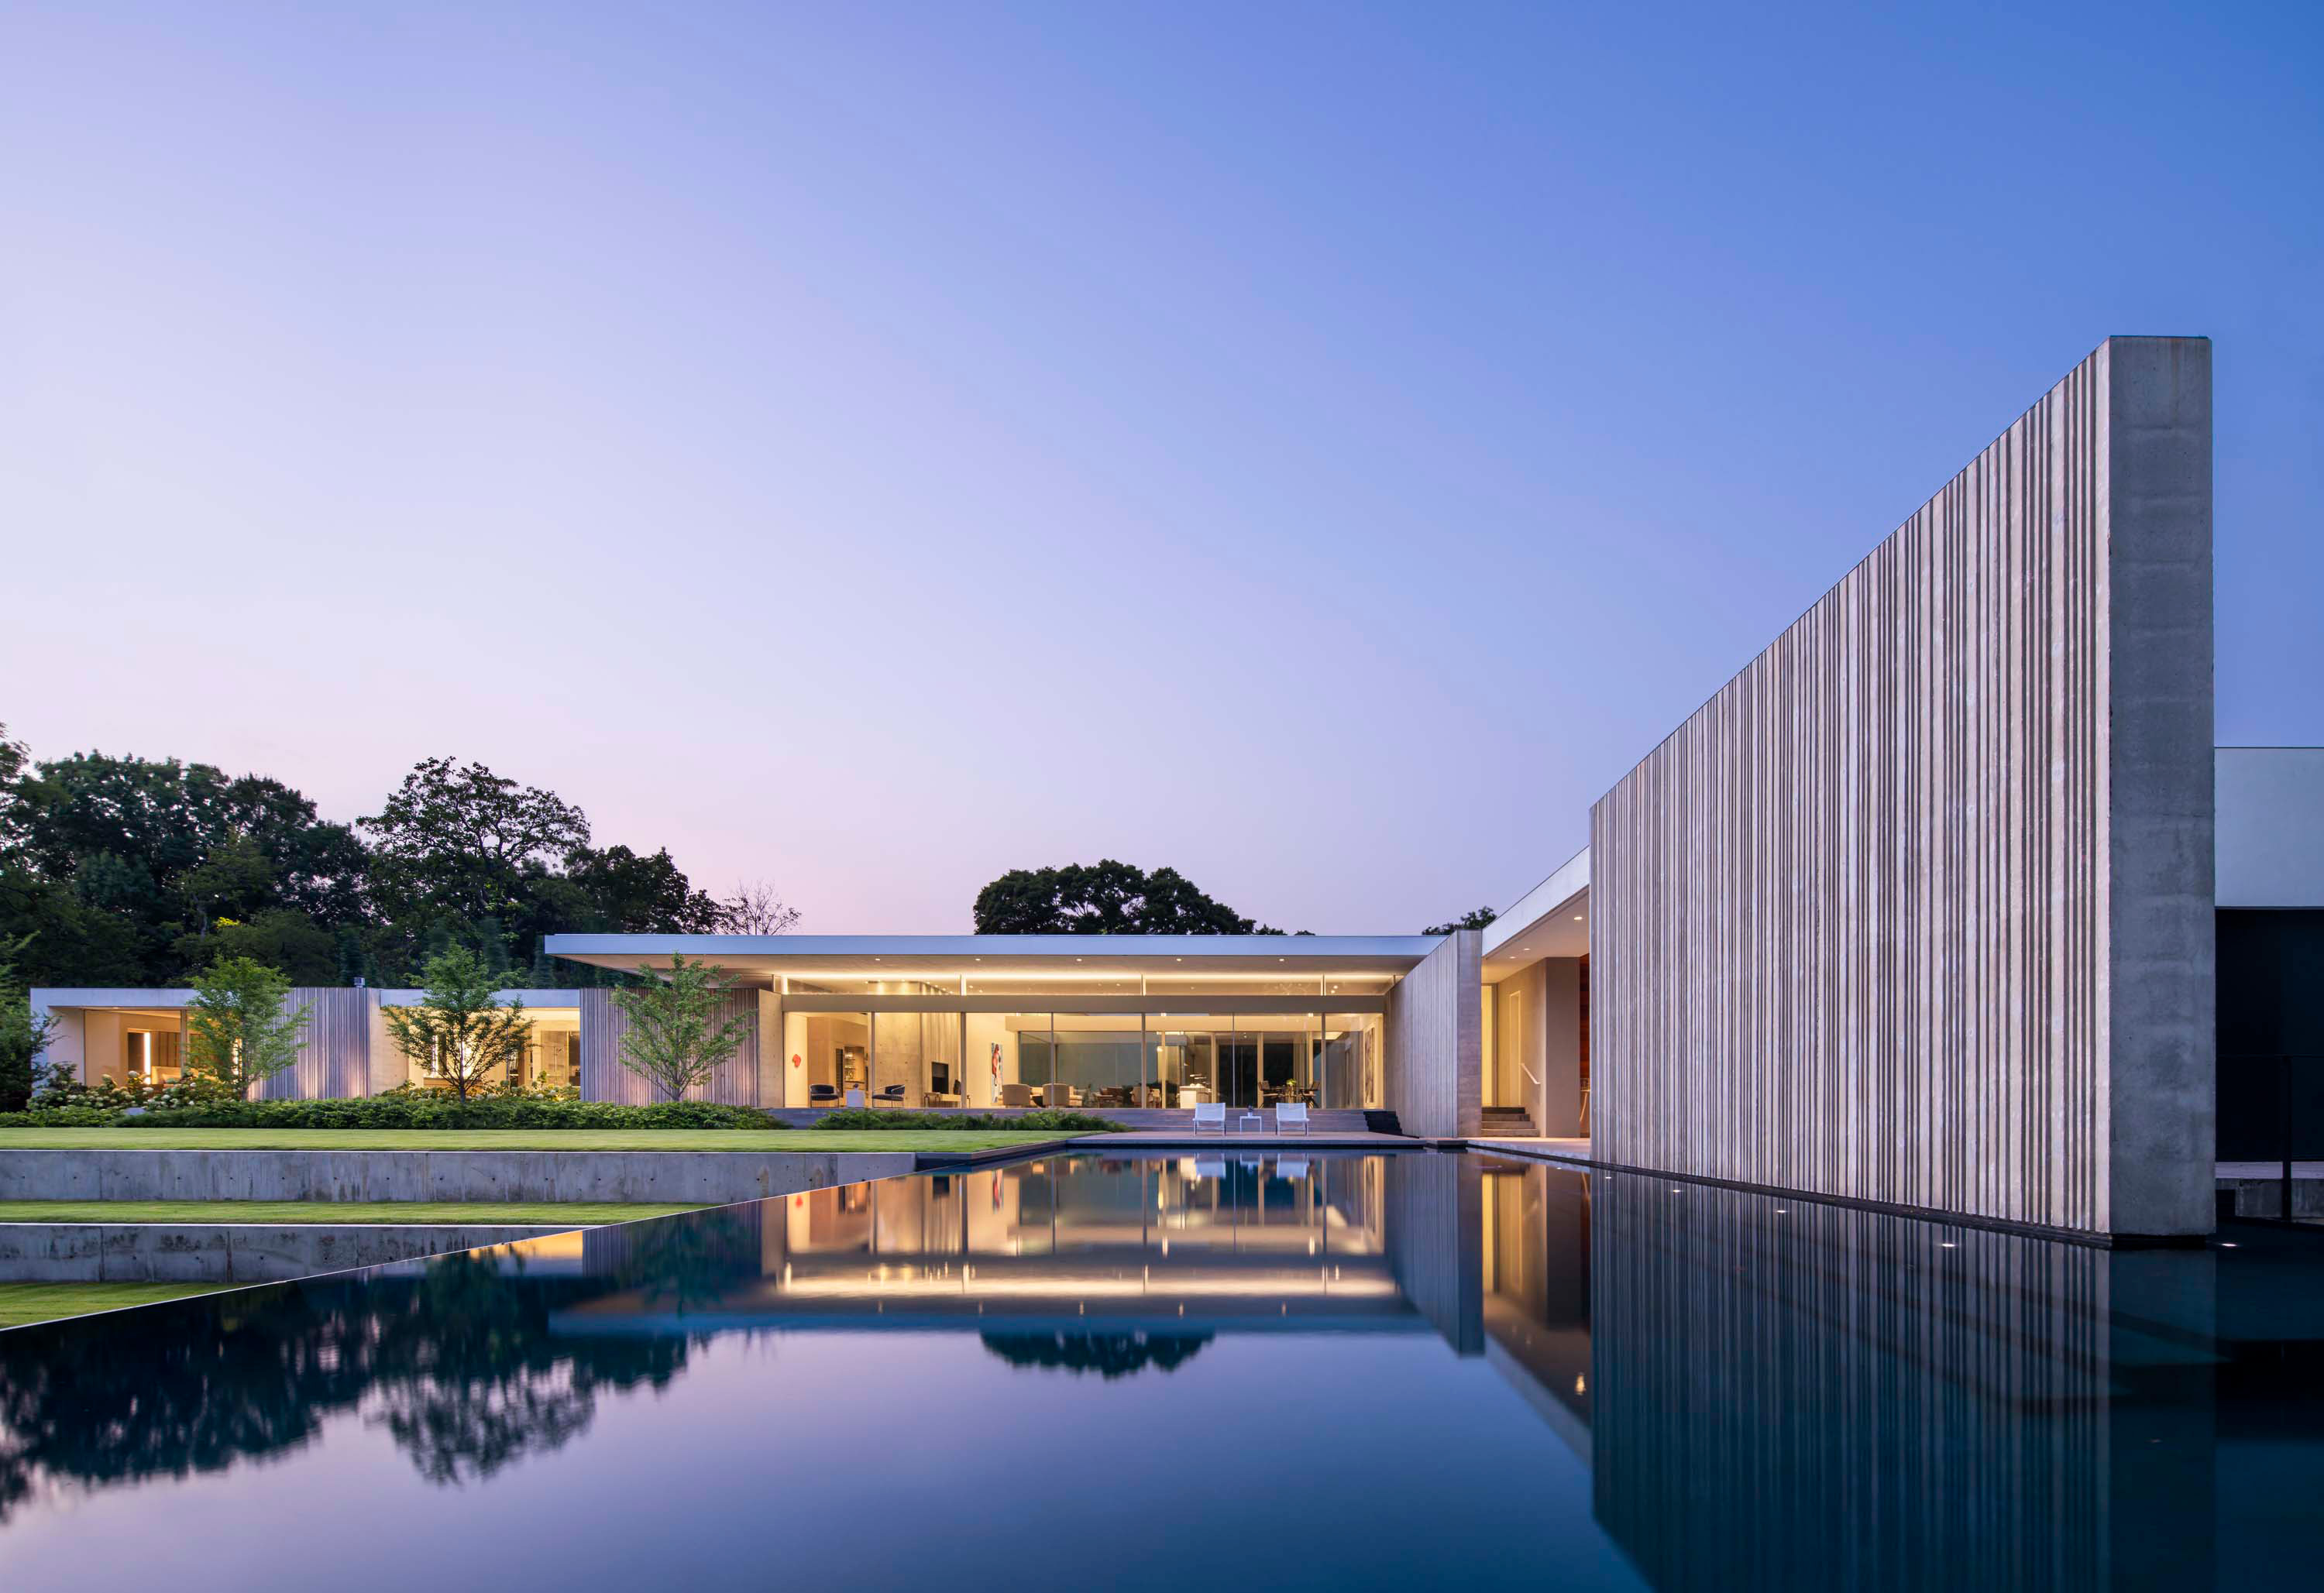 Exterior photo of the Preston Hollow Residence by Specht Novak Architects. Shot at dusk by Manolo Langis, featuring the pool, glowing home, and monolithic concrete wall.